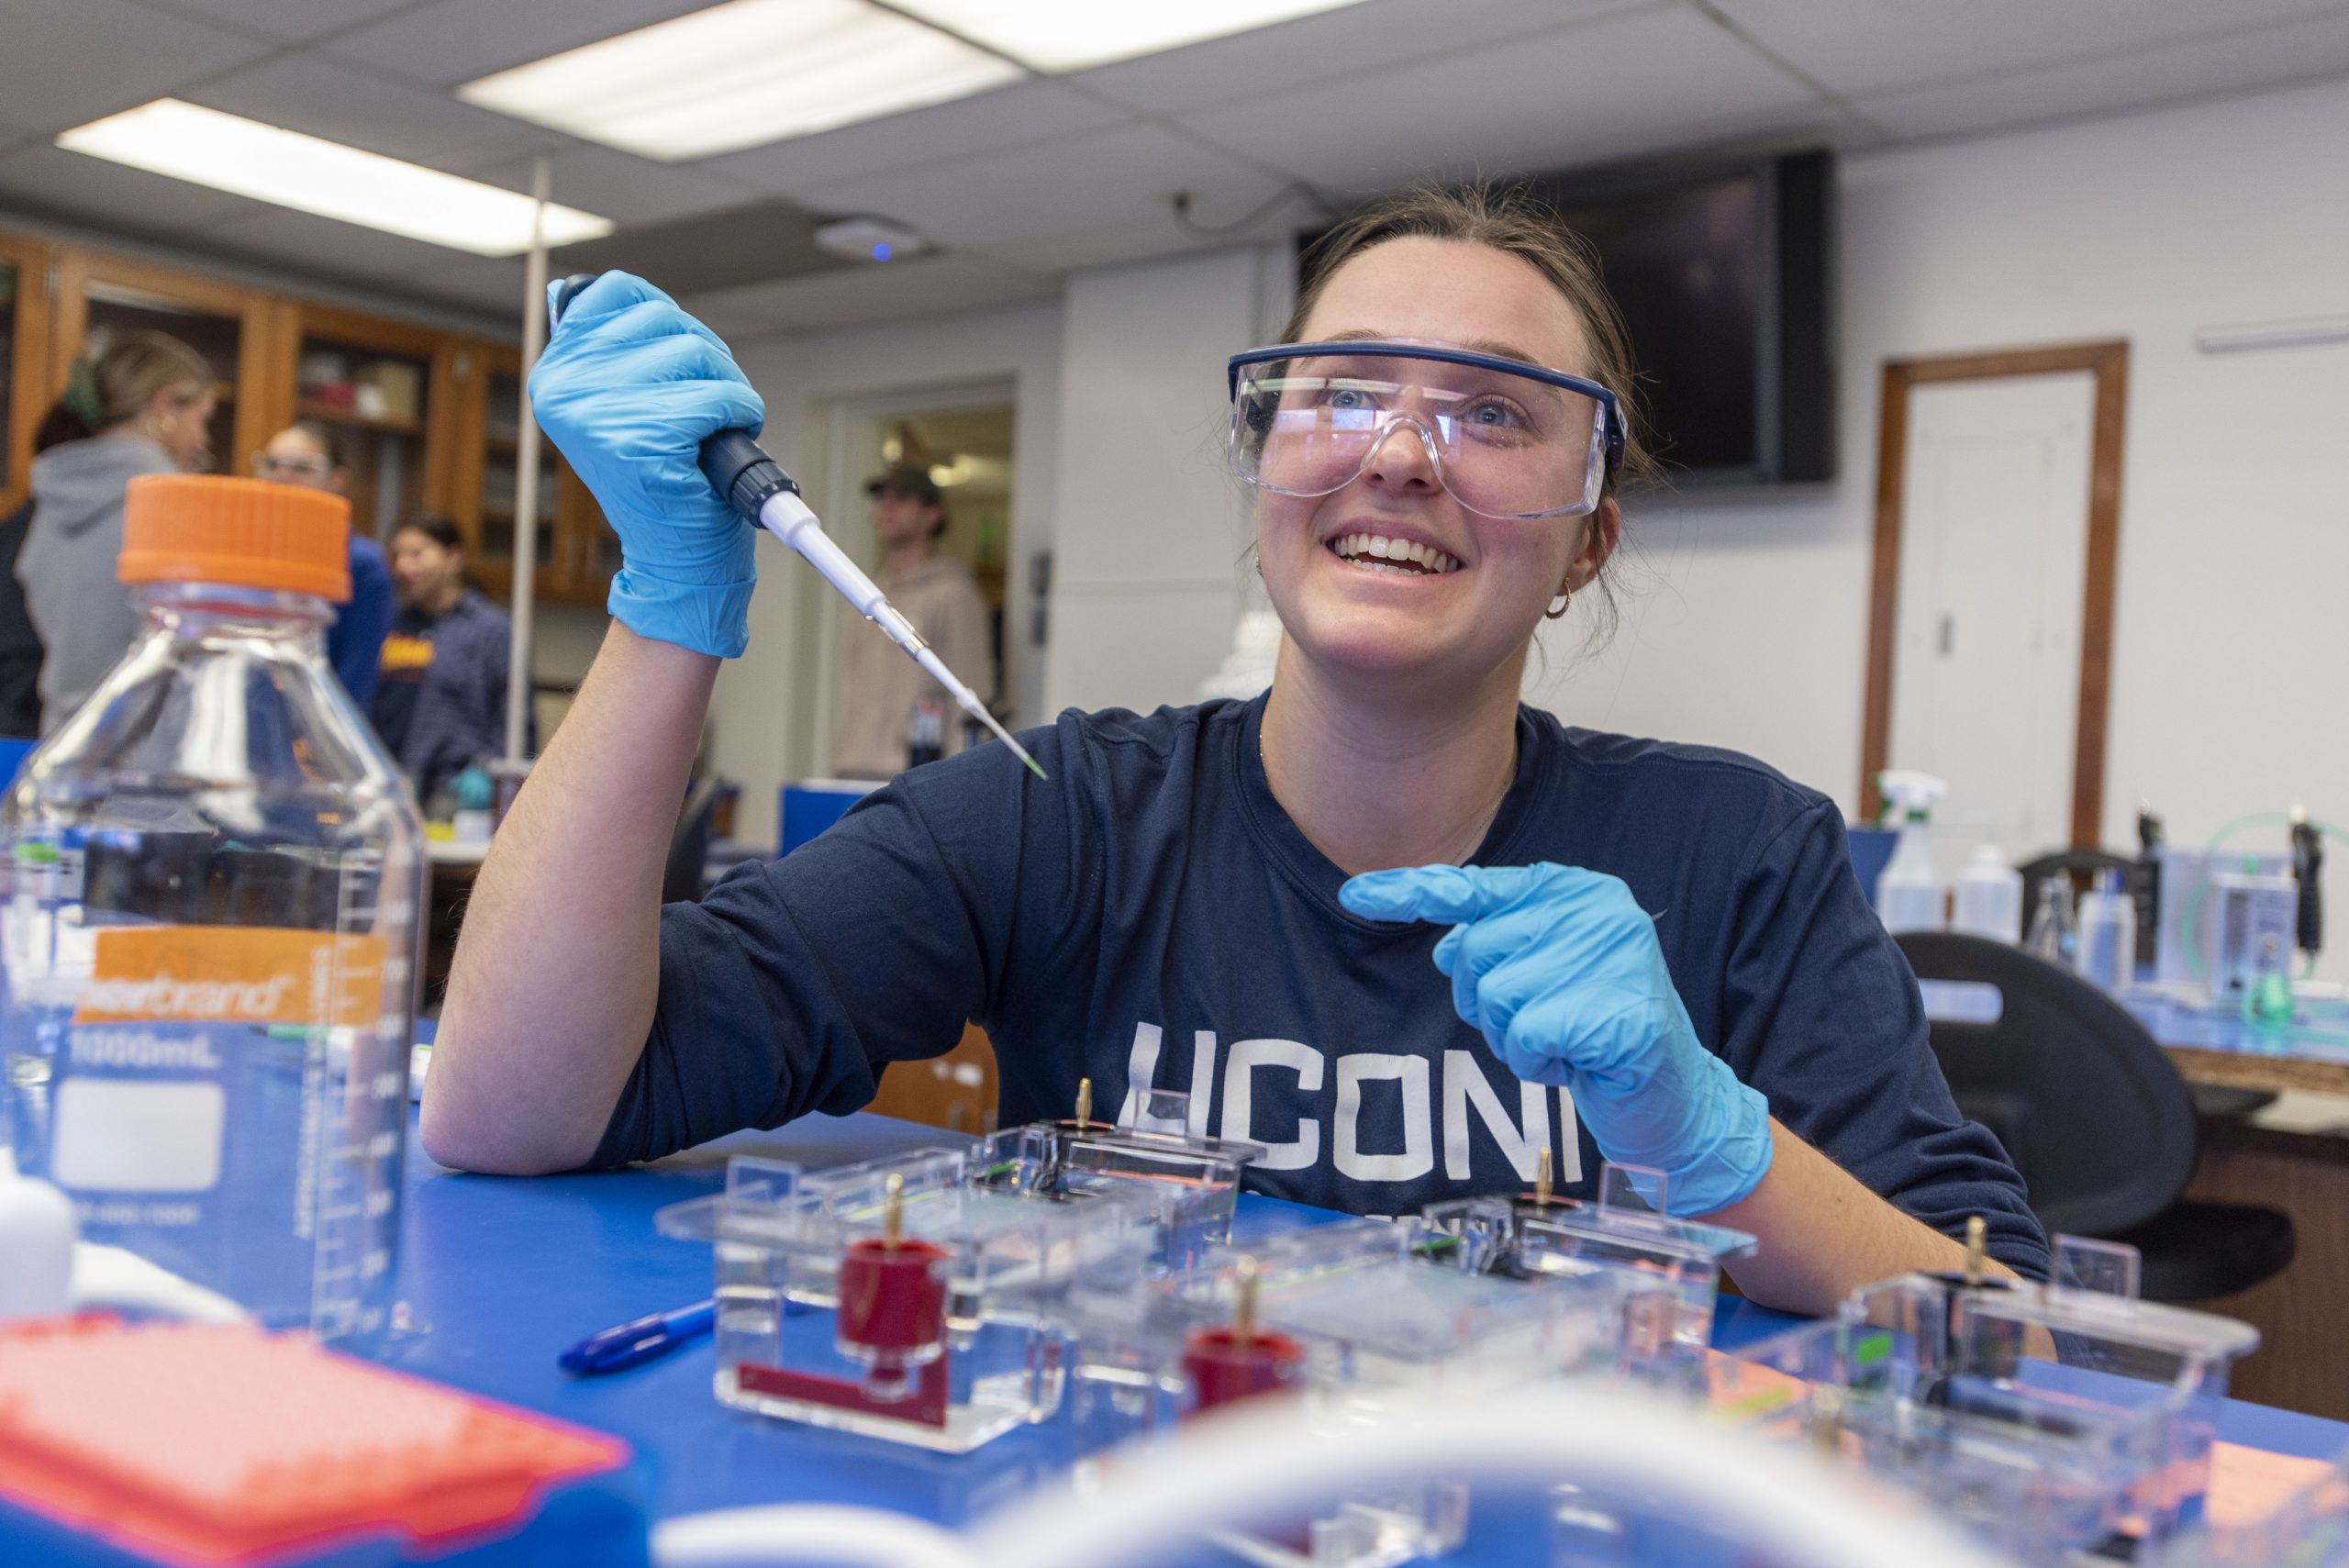 A white female college student wearing a blue shirt that says "UConn," blue latex gloves, and safety glasses holds a large pipette and smiles at someone just to the left of the camera in a lab classroom.